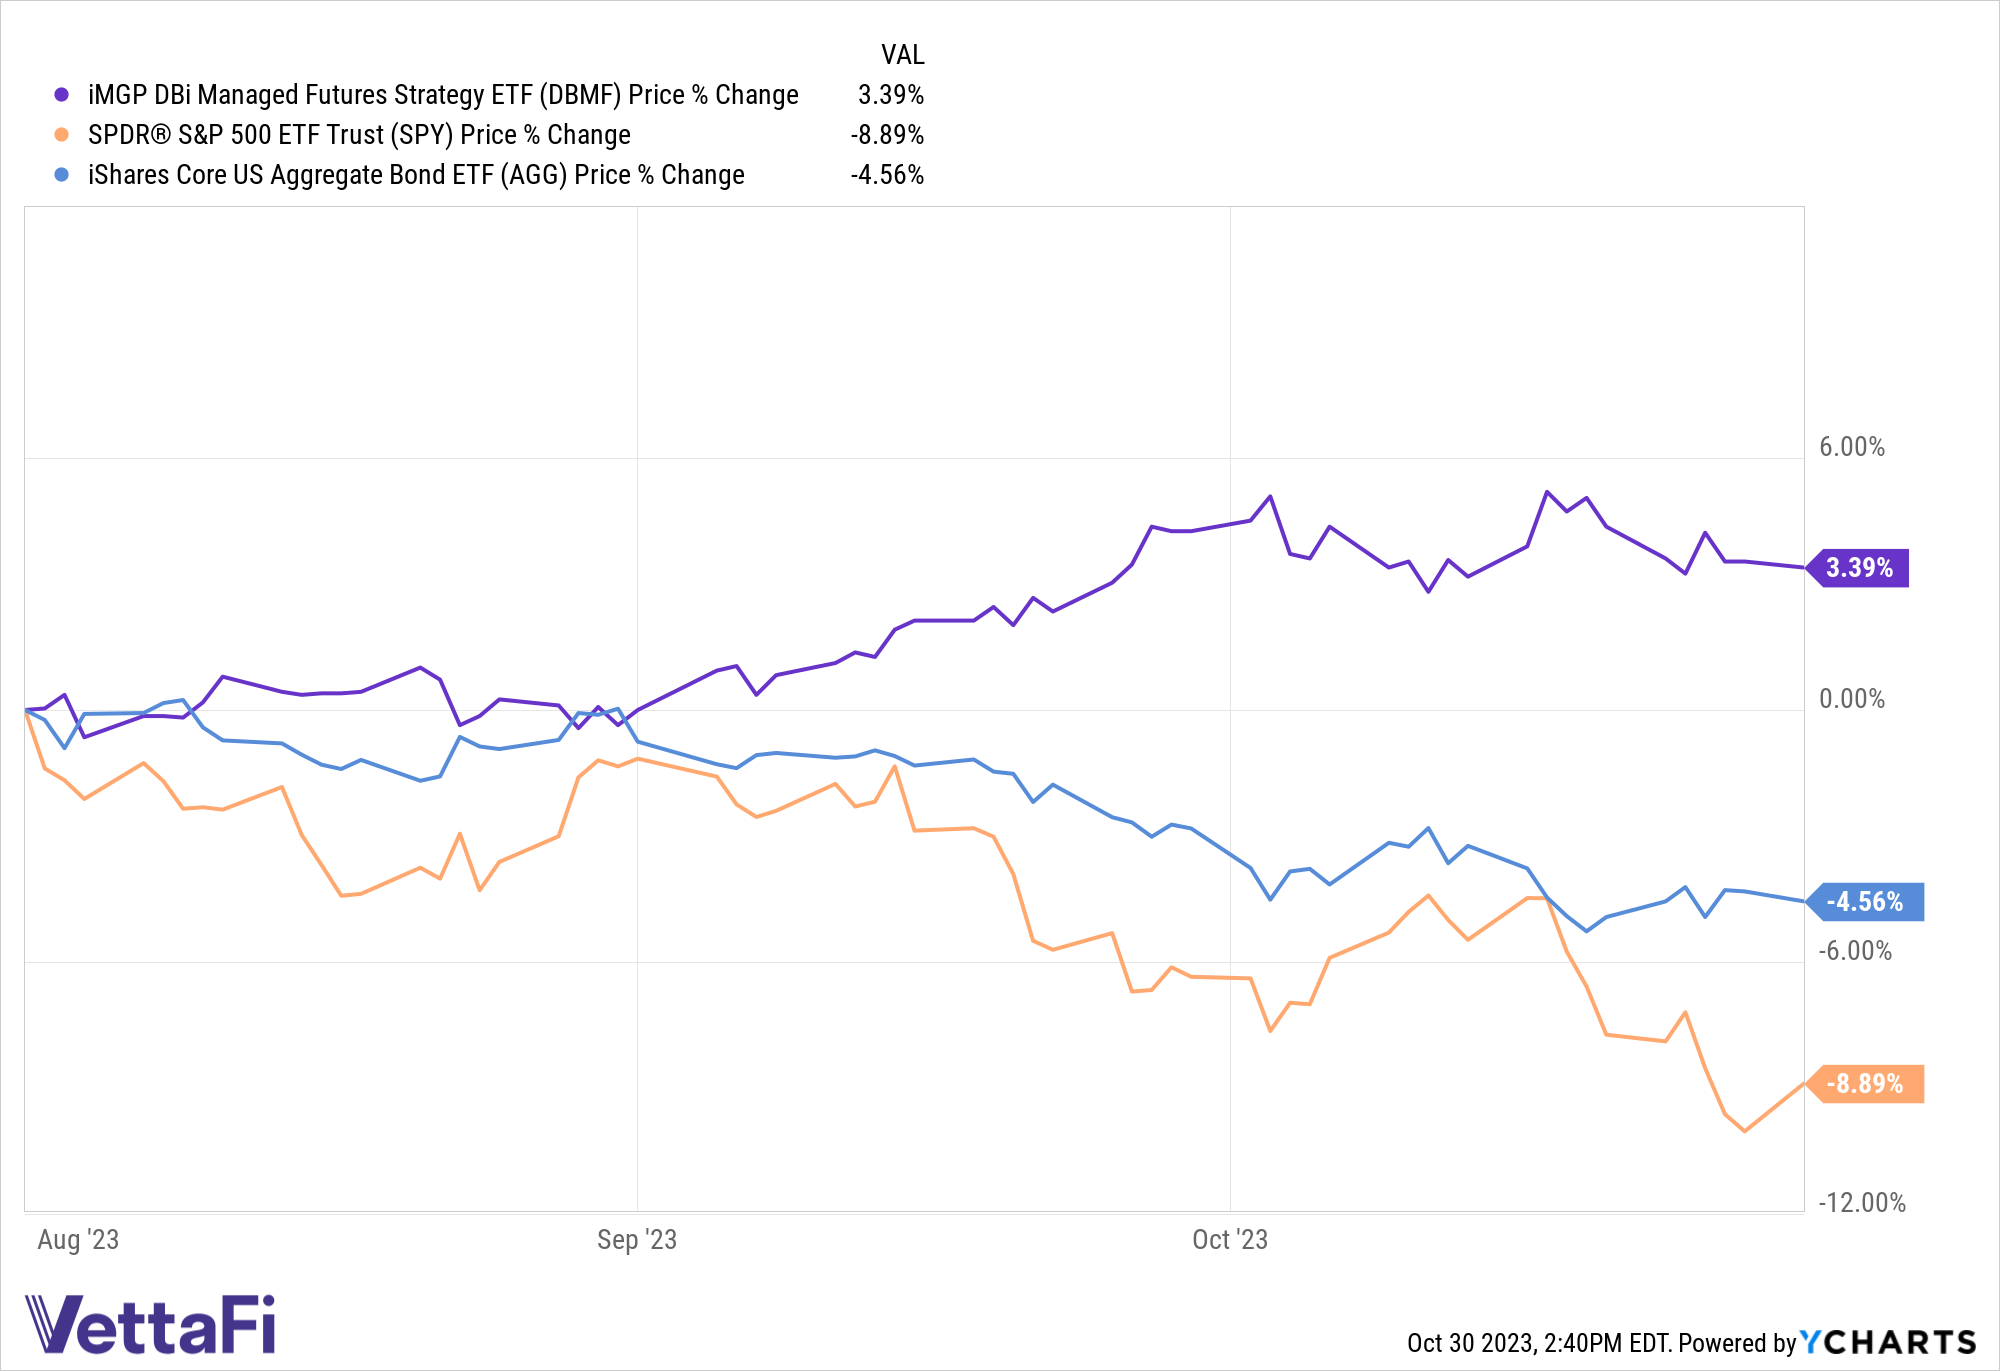 Chart of price returns for DBMF, AGG, and SPY from August 1 through October 30, 2023